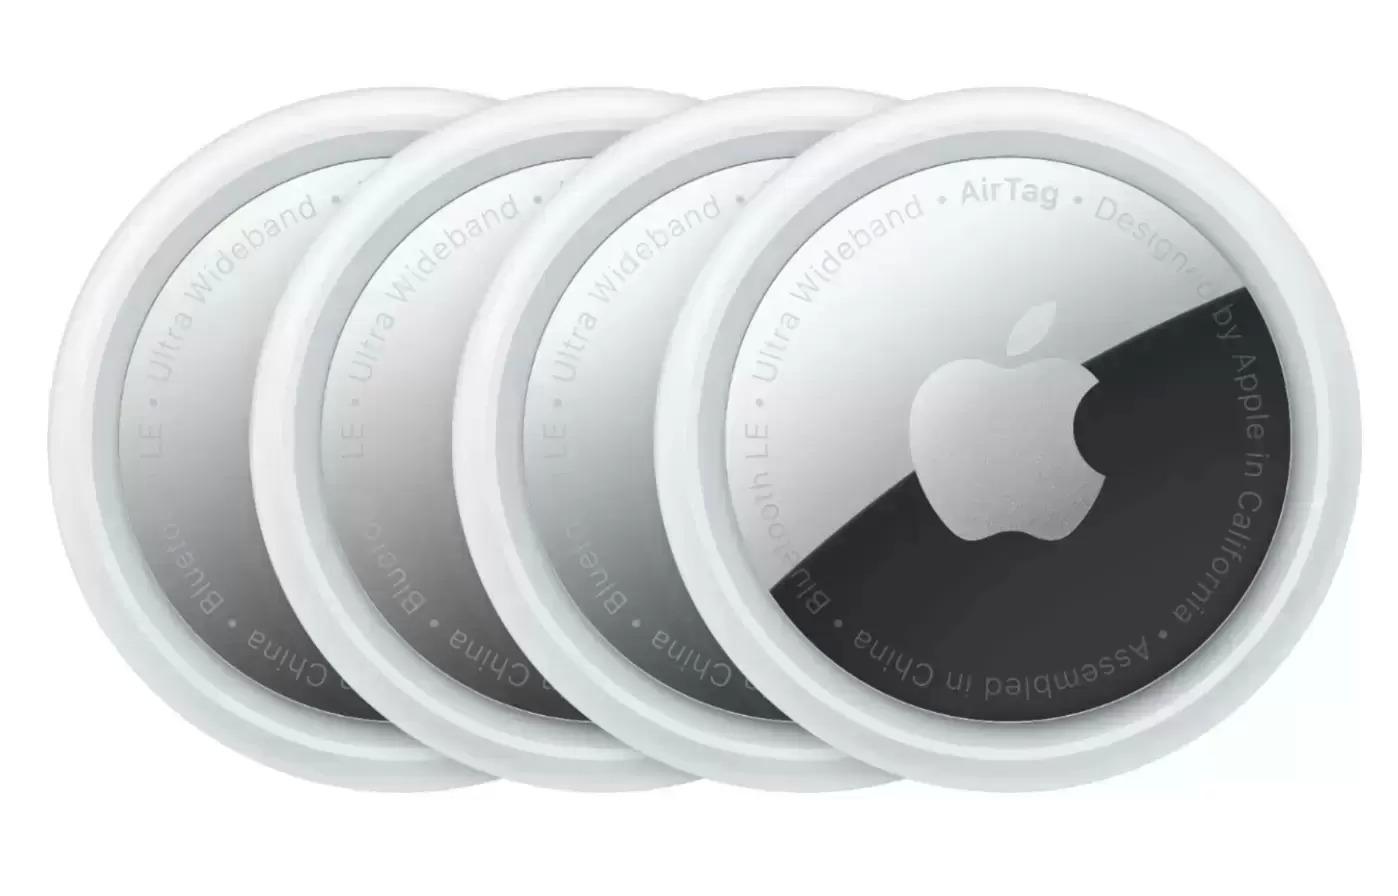 Apple AirTags GPS Tracking Device 4 Pack for $79.99 Shipped